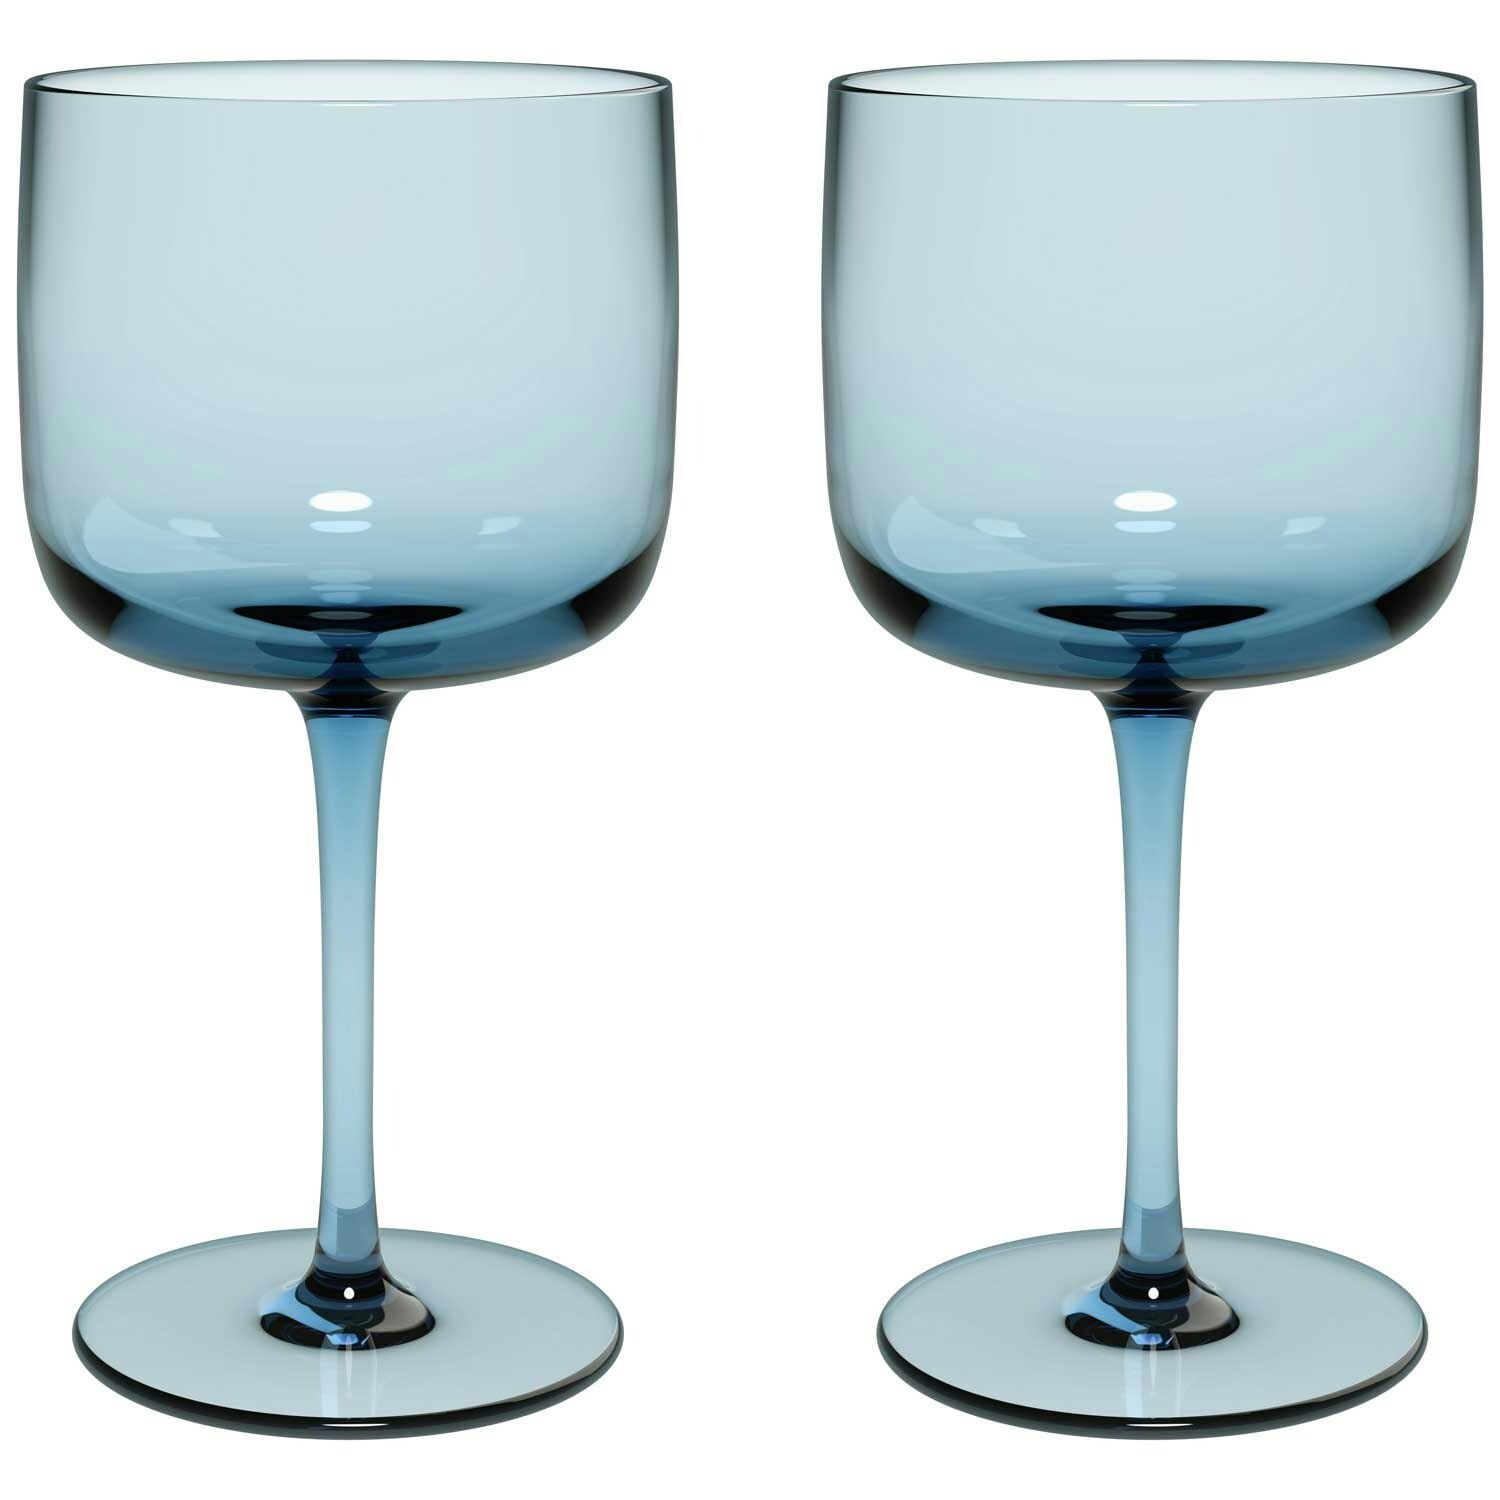 16 oz Whiskey or Wine Glasses with Frosted Design (2 Pack)